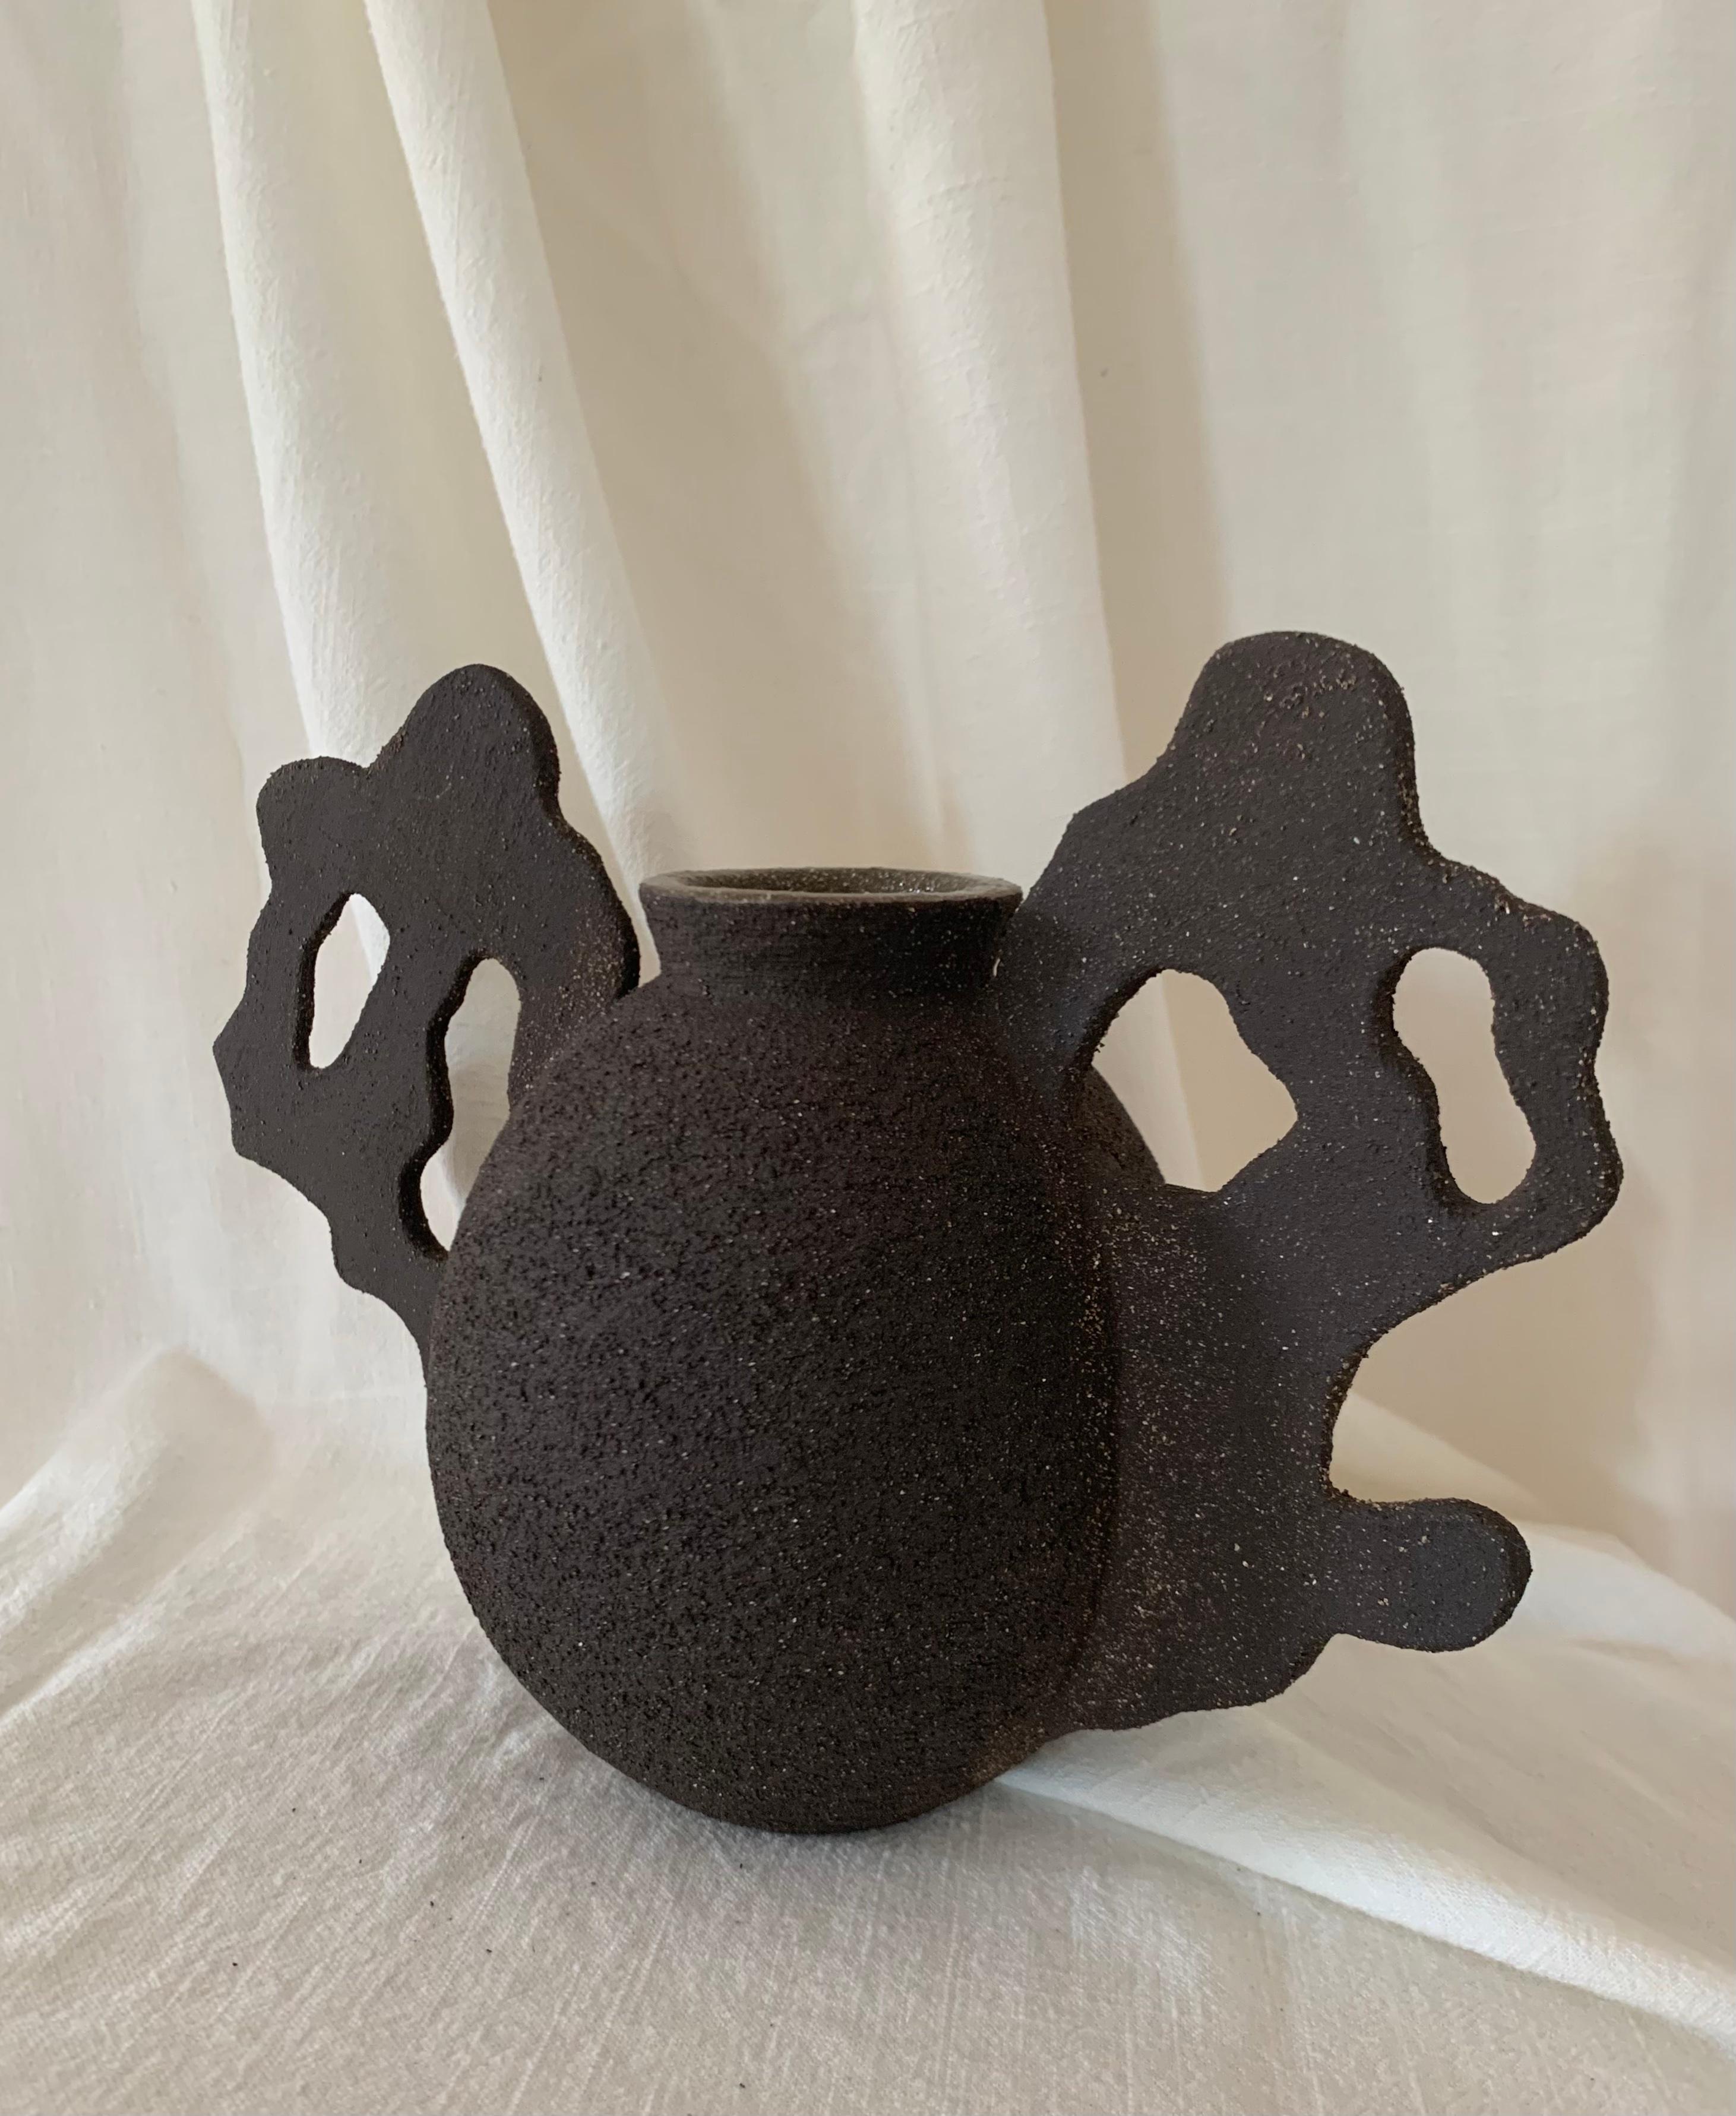 Brutalist Contemporary Ruby Bell Ceramics Black Round Vessel with Organic Side Detail For Sale